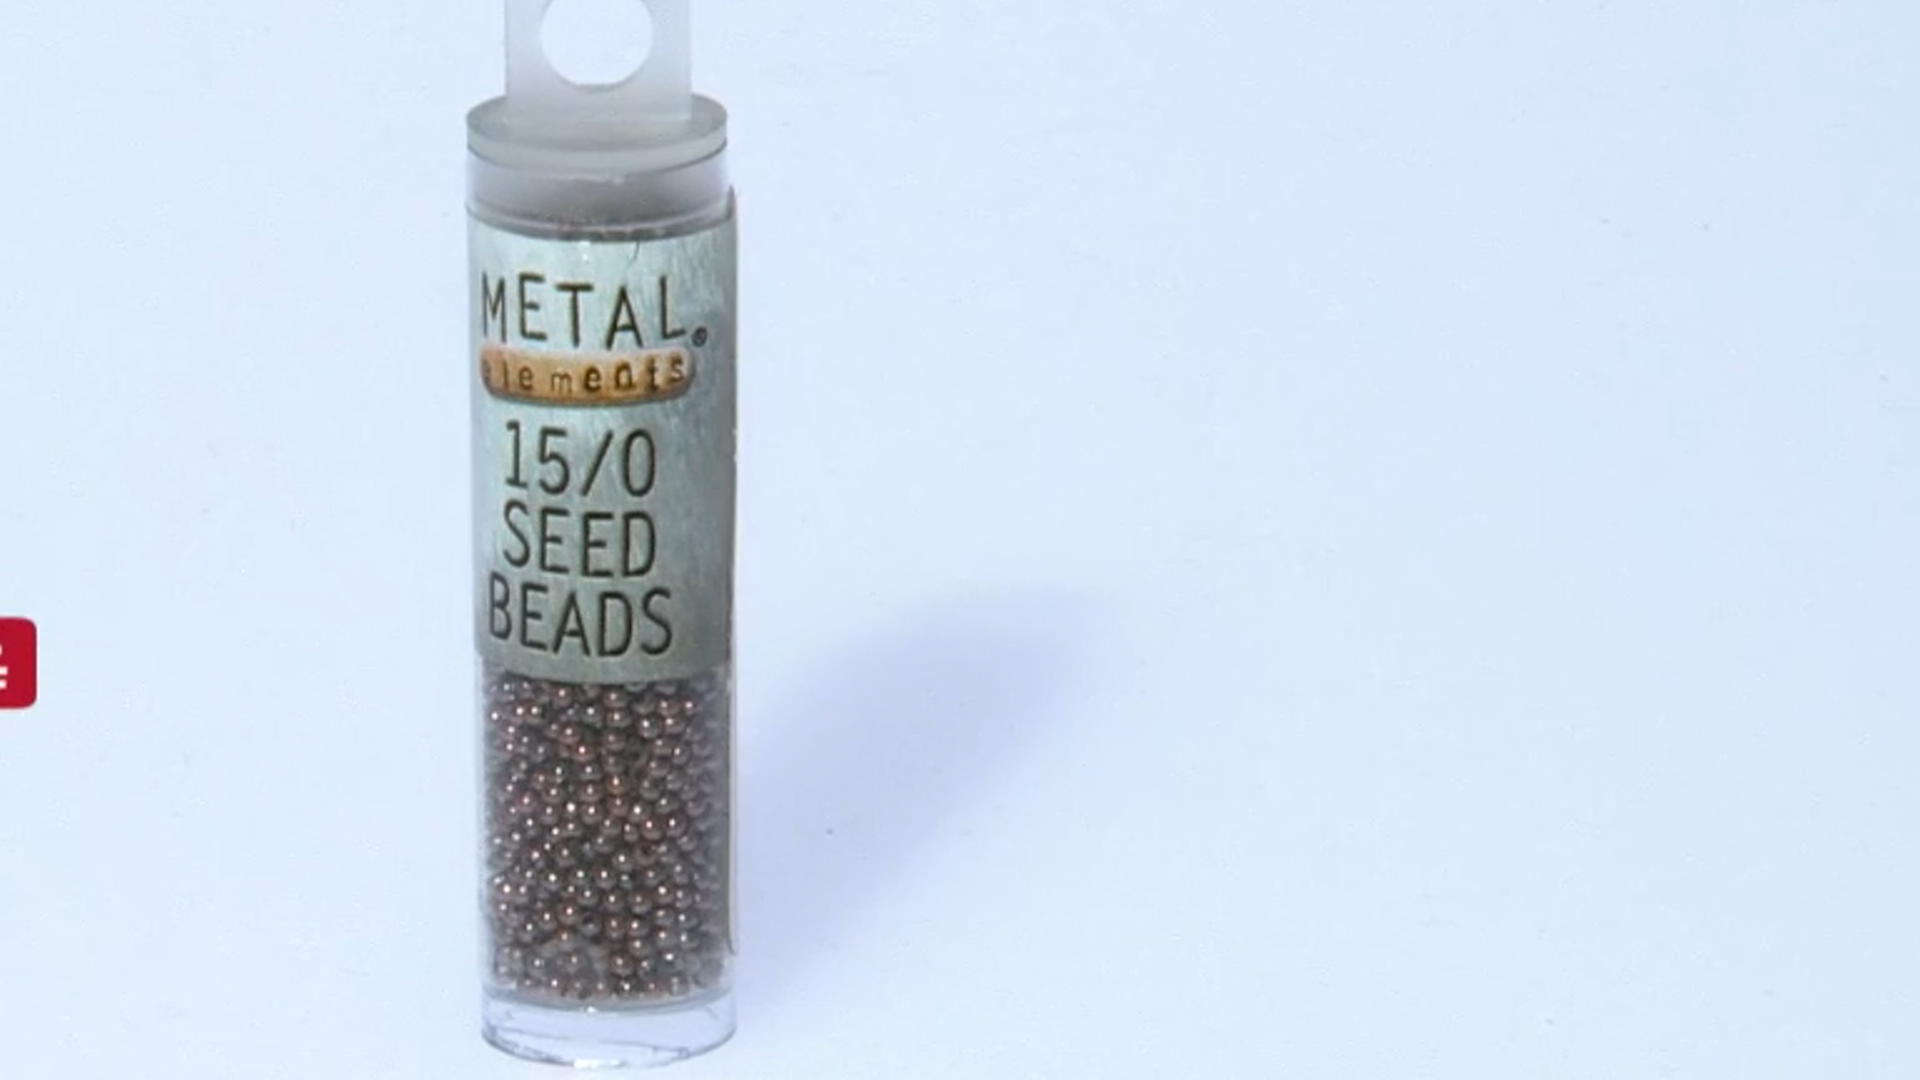 15/0 Metal Seed Beads in Antiqued Copper Tone appx 15 Grams Video Thumbnail